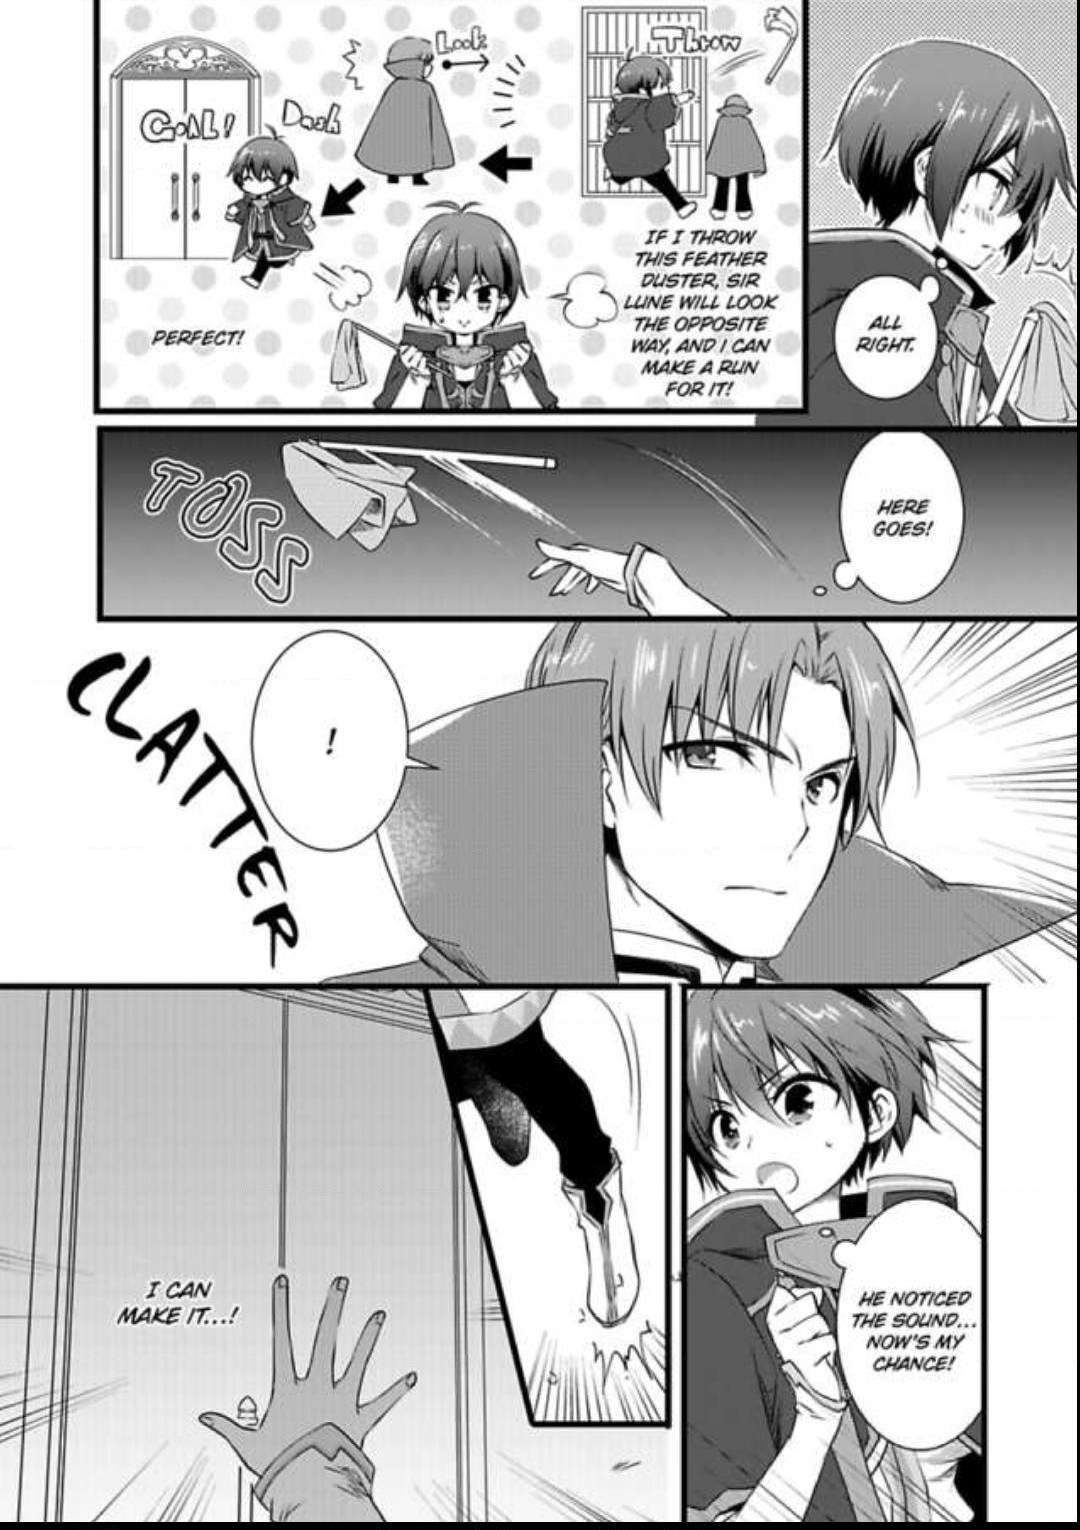 I Turned into a Girl and Turned on All the Knights! -I Need to Have Sex to Turn Back!- - chapter 4 - #4